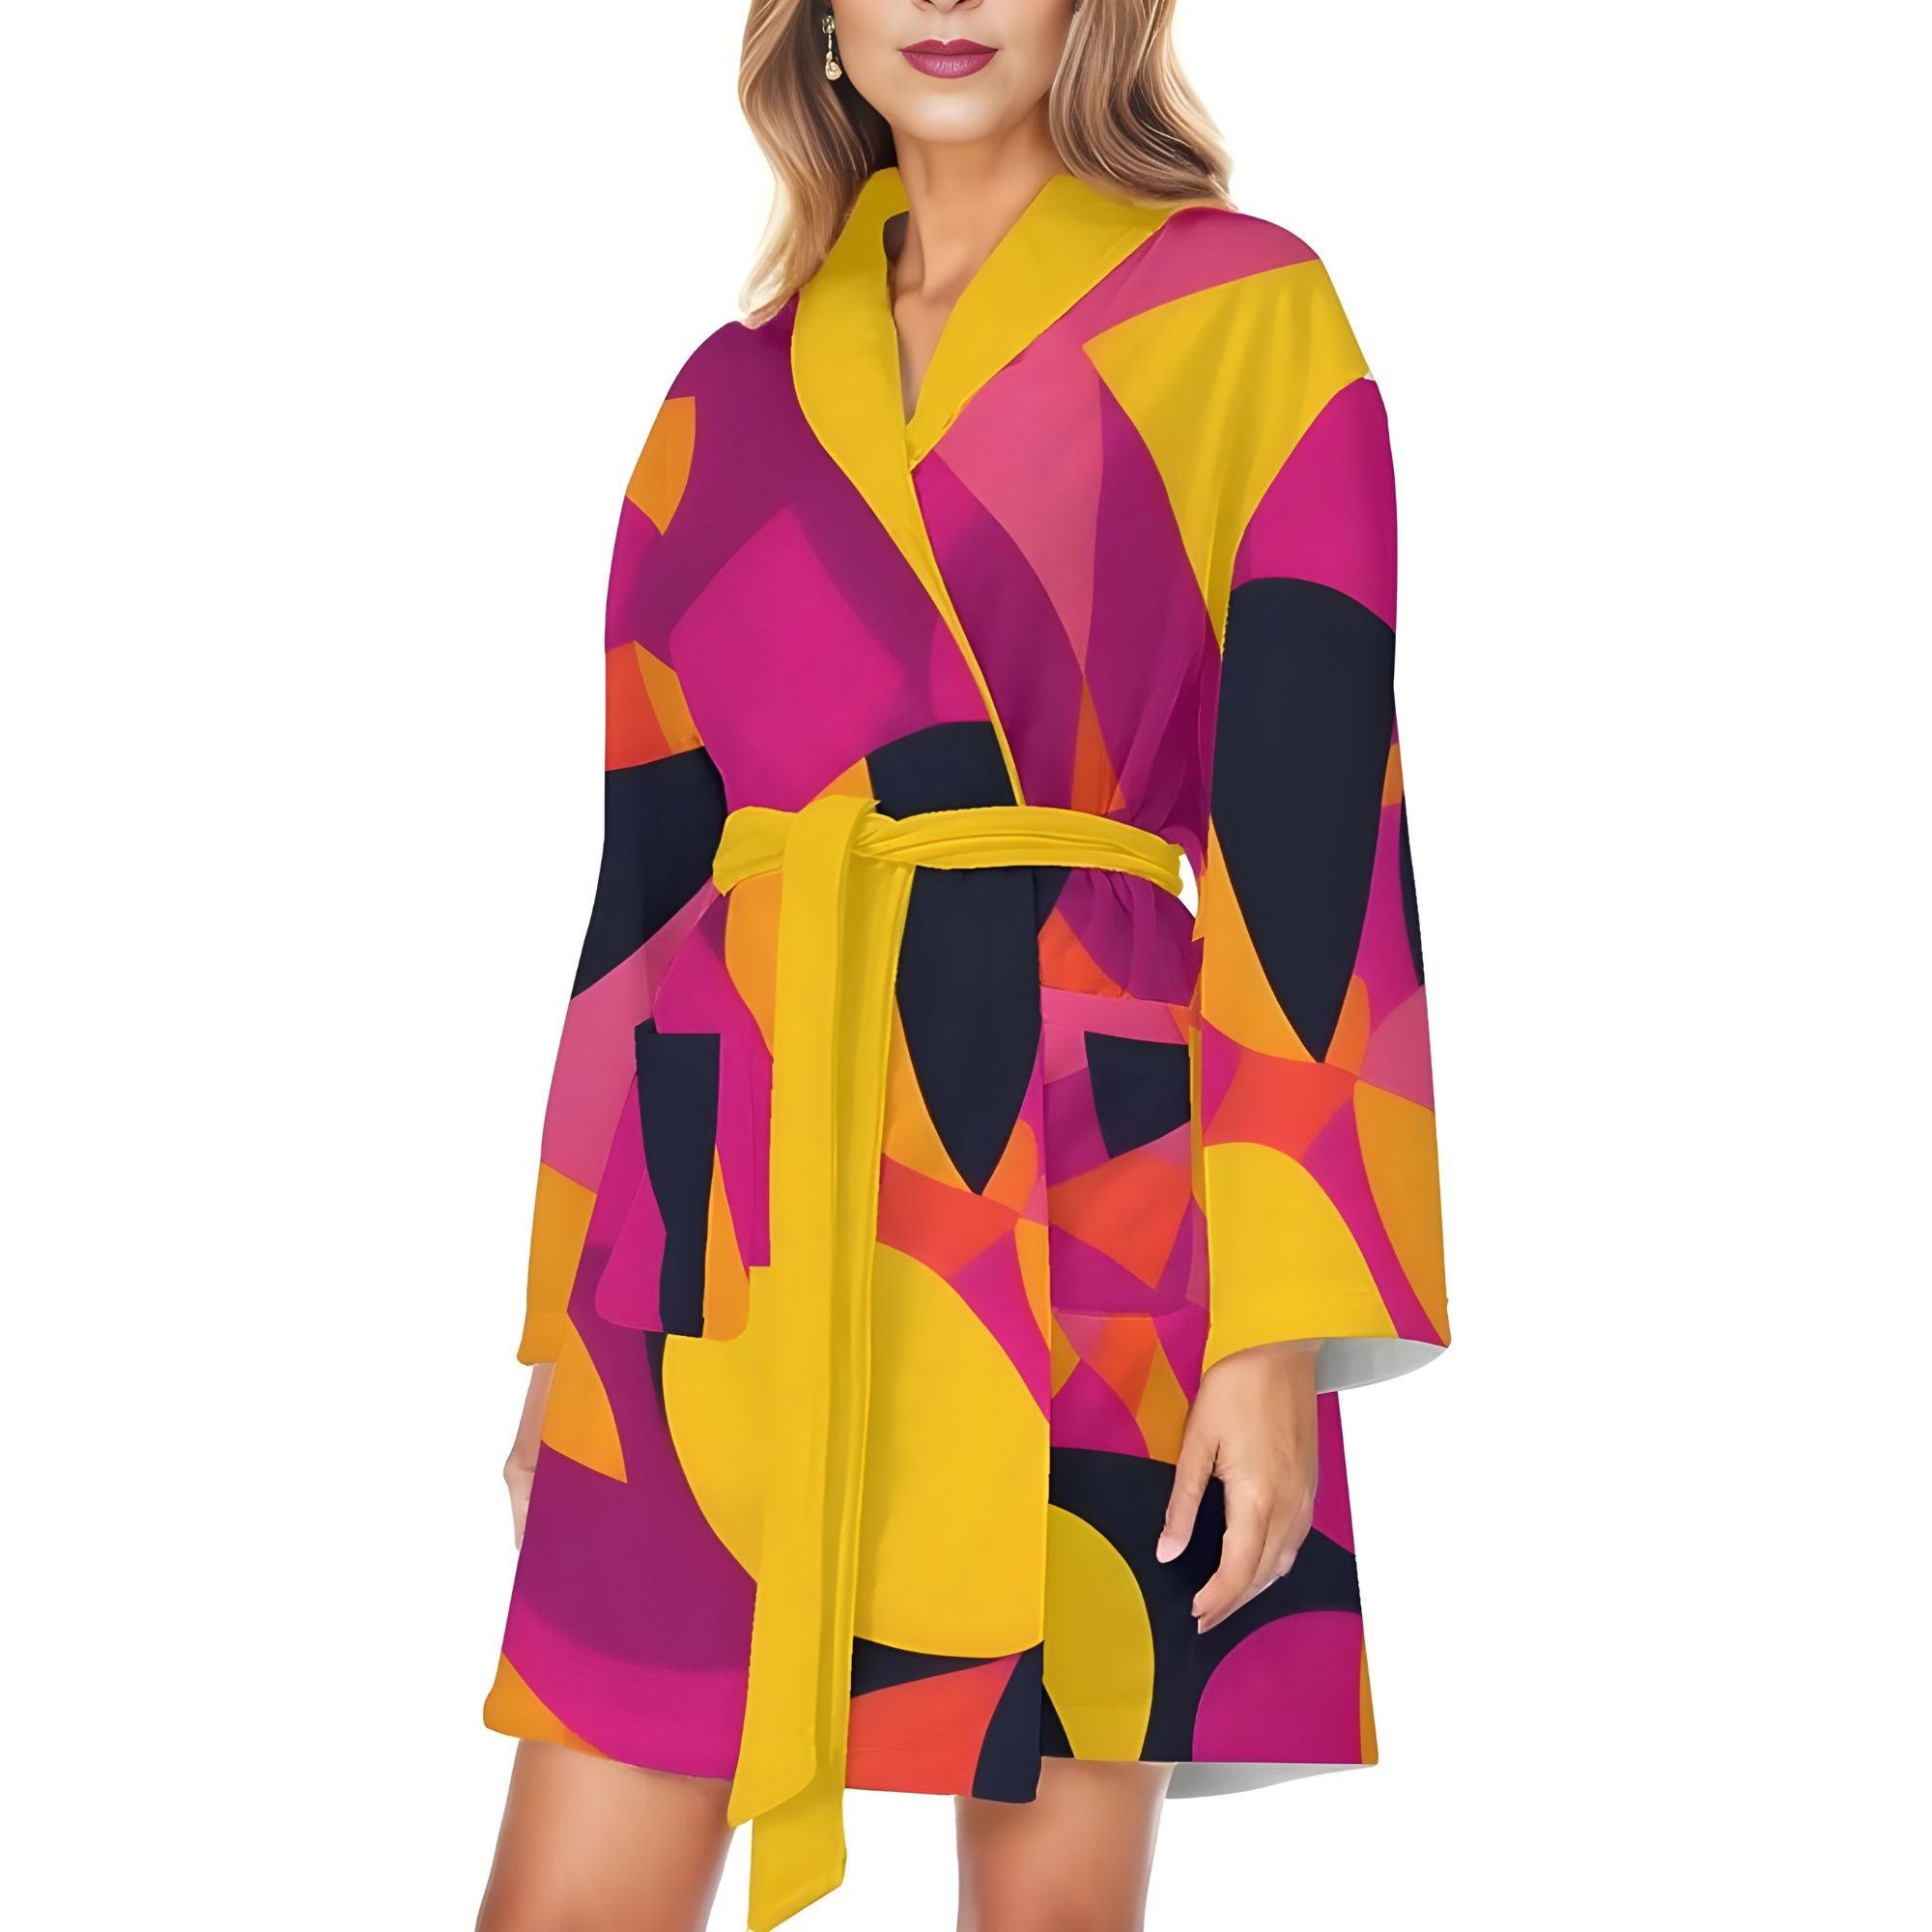 Airline Series Lightweight Short Bathrobe - Abstract - Belted Robe Pink Yellow Orange Retro Bold Vibrant Pockets Women's 929 Blissfully Brand Black Label Psychedelic 70's pop art Geometric